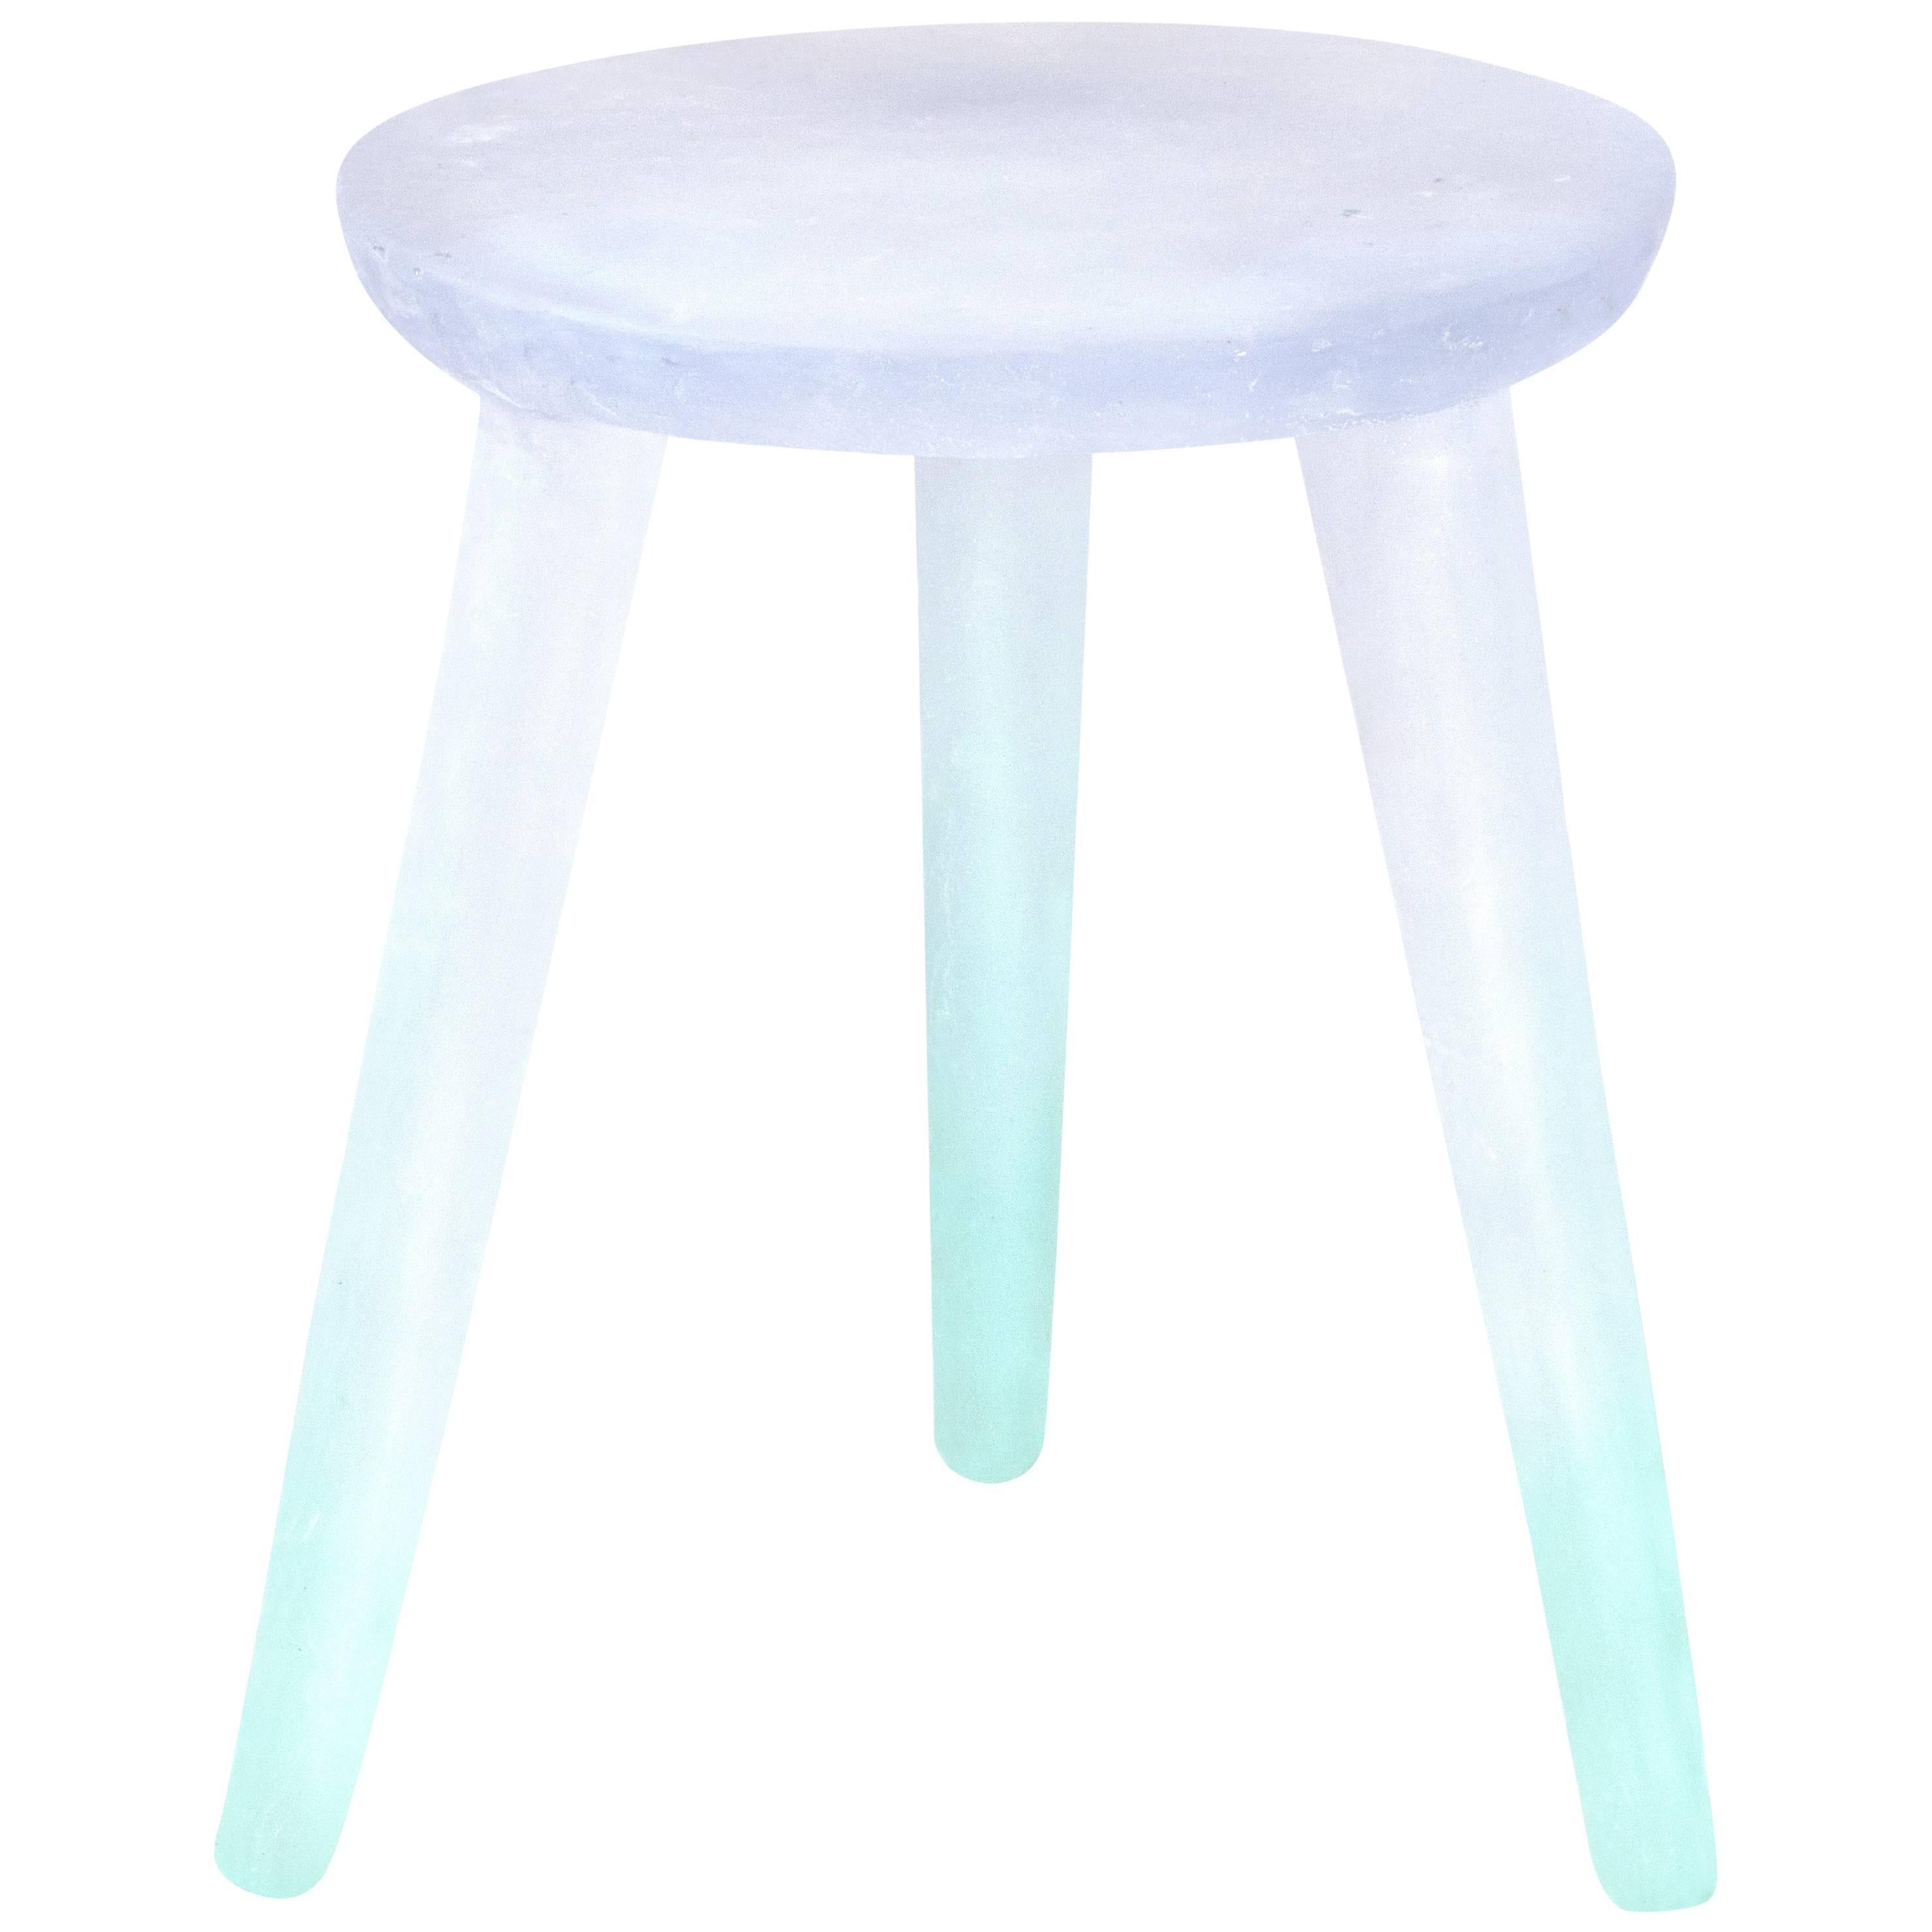 Glow Side Table or Stool in Periwinkle to Aqua, Handmade from Recycled Resin For Sale